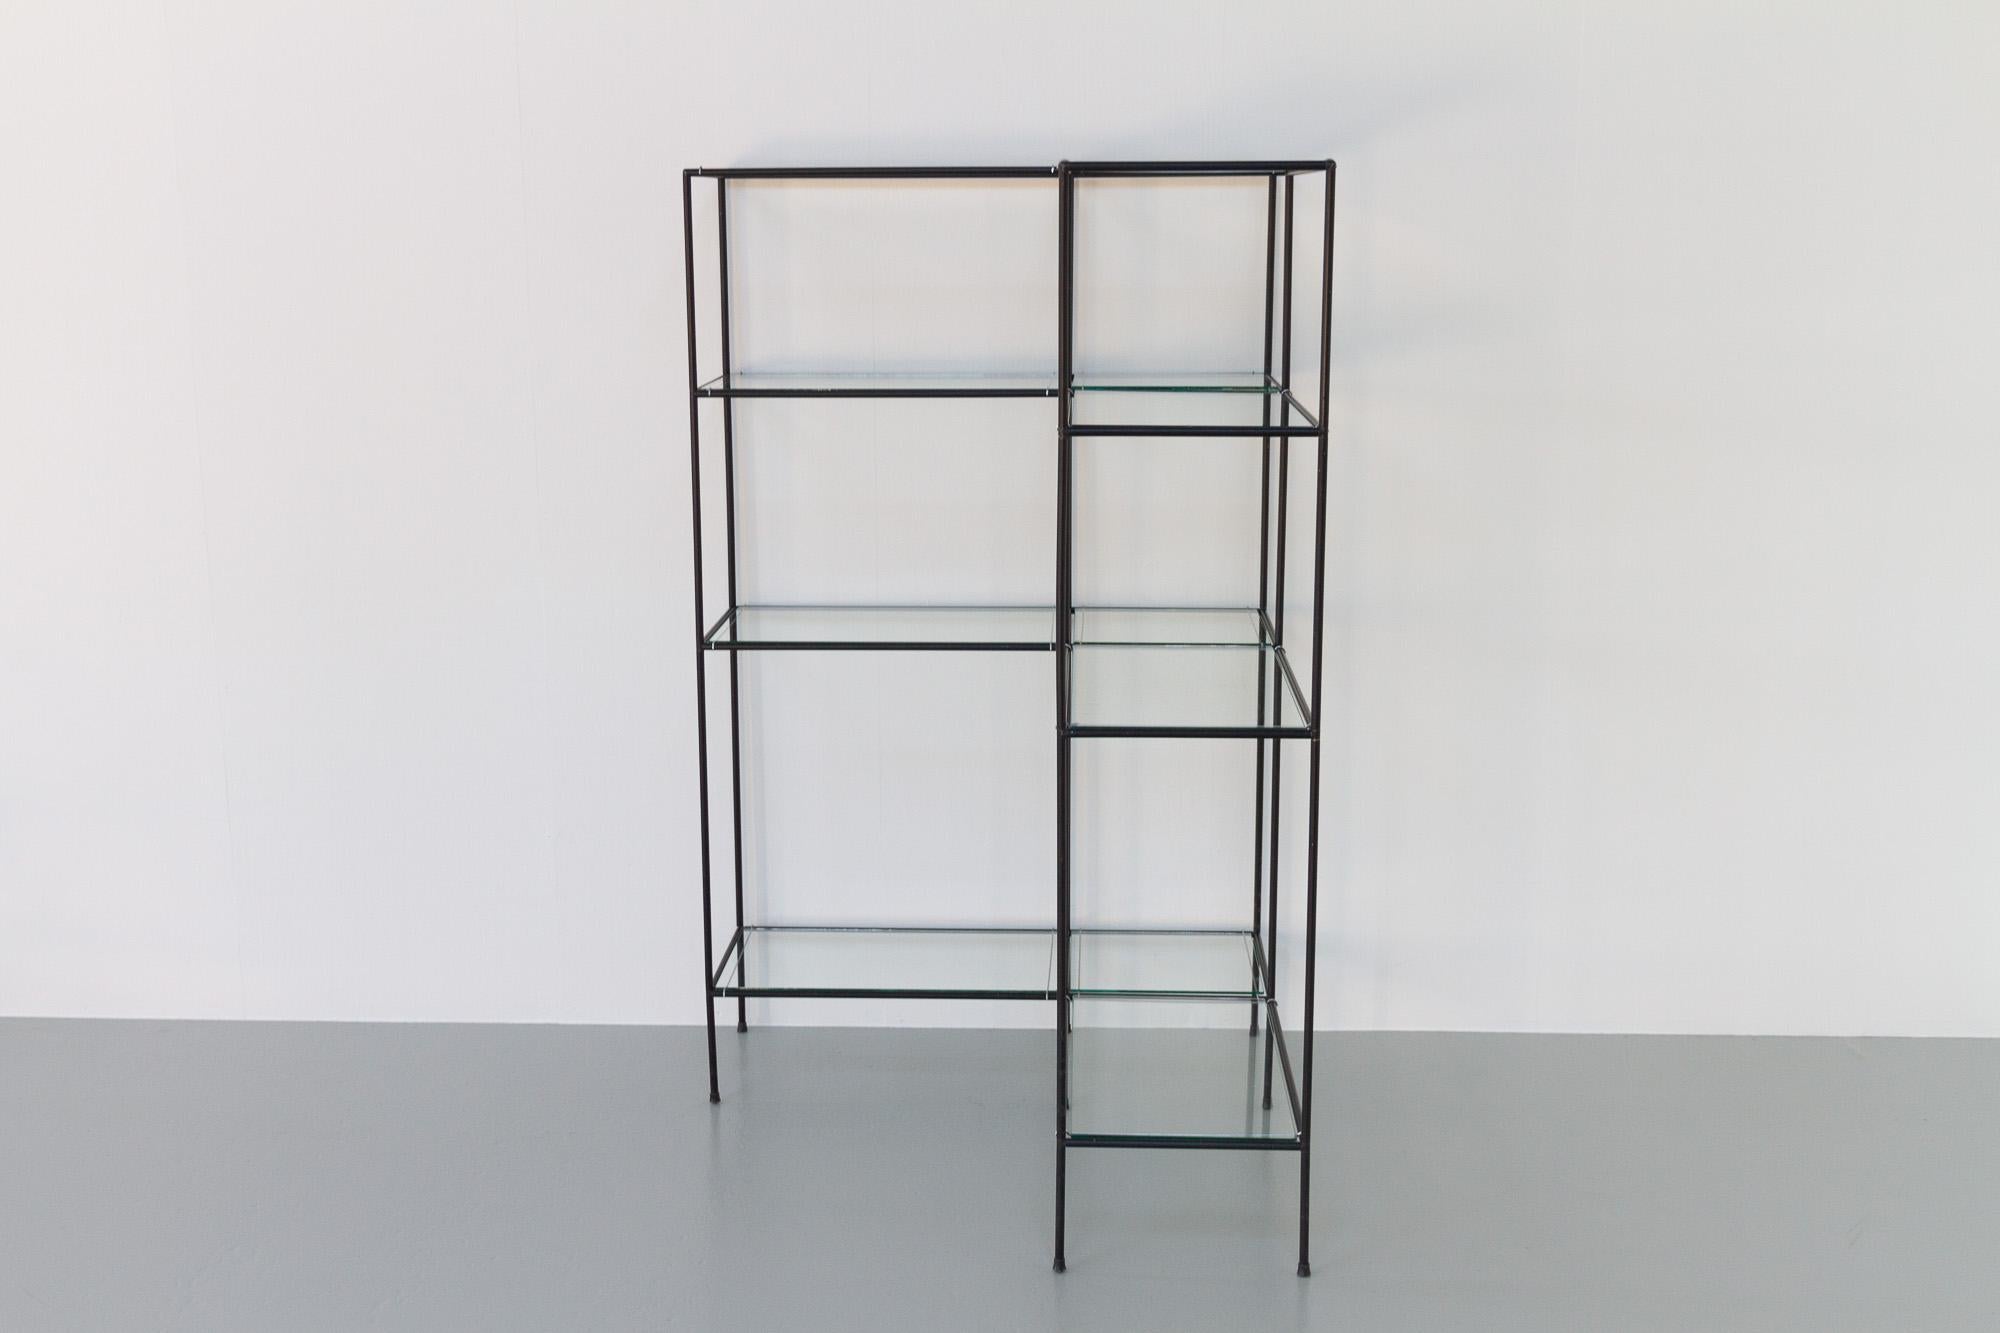 Vintage Danish Abstracta corner bookcase by Poul Cadovius, 1960s.

Mid-Century Modern minimalistic shelving unit system Abstracta, Denmark designed in 1962 by Danish architect Poul Cadovius. He was also known for designing the very popular wall